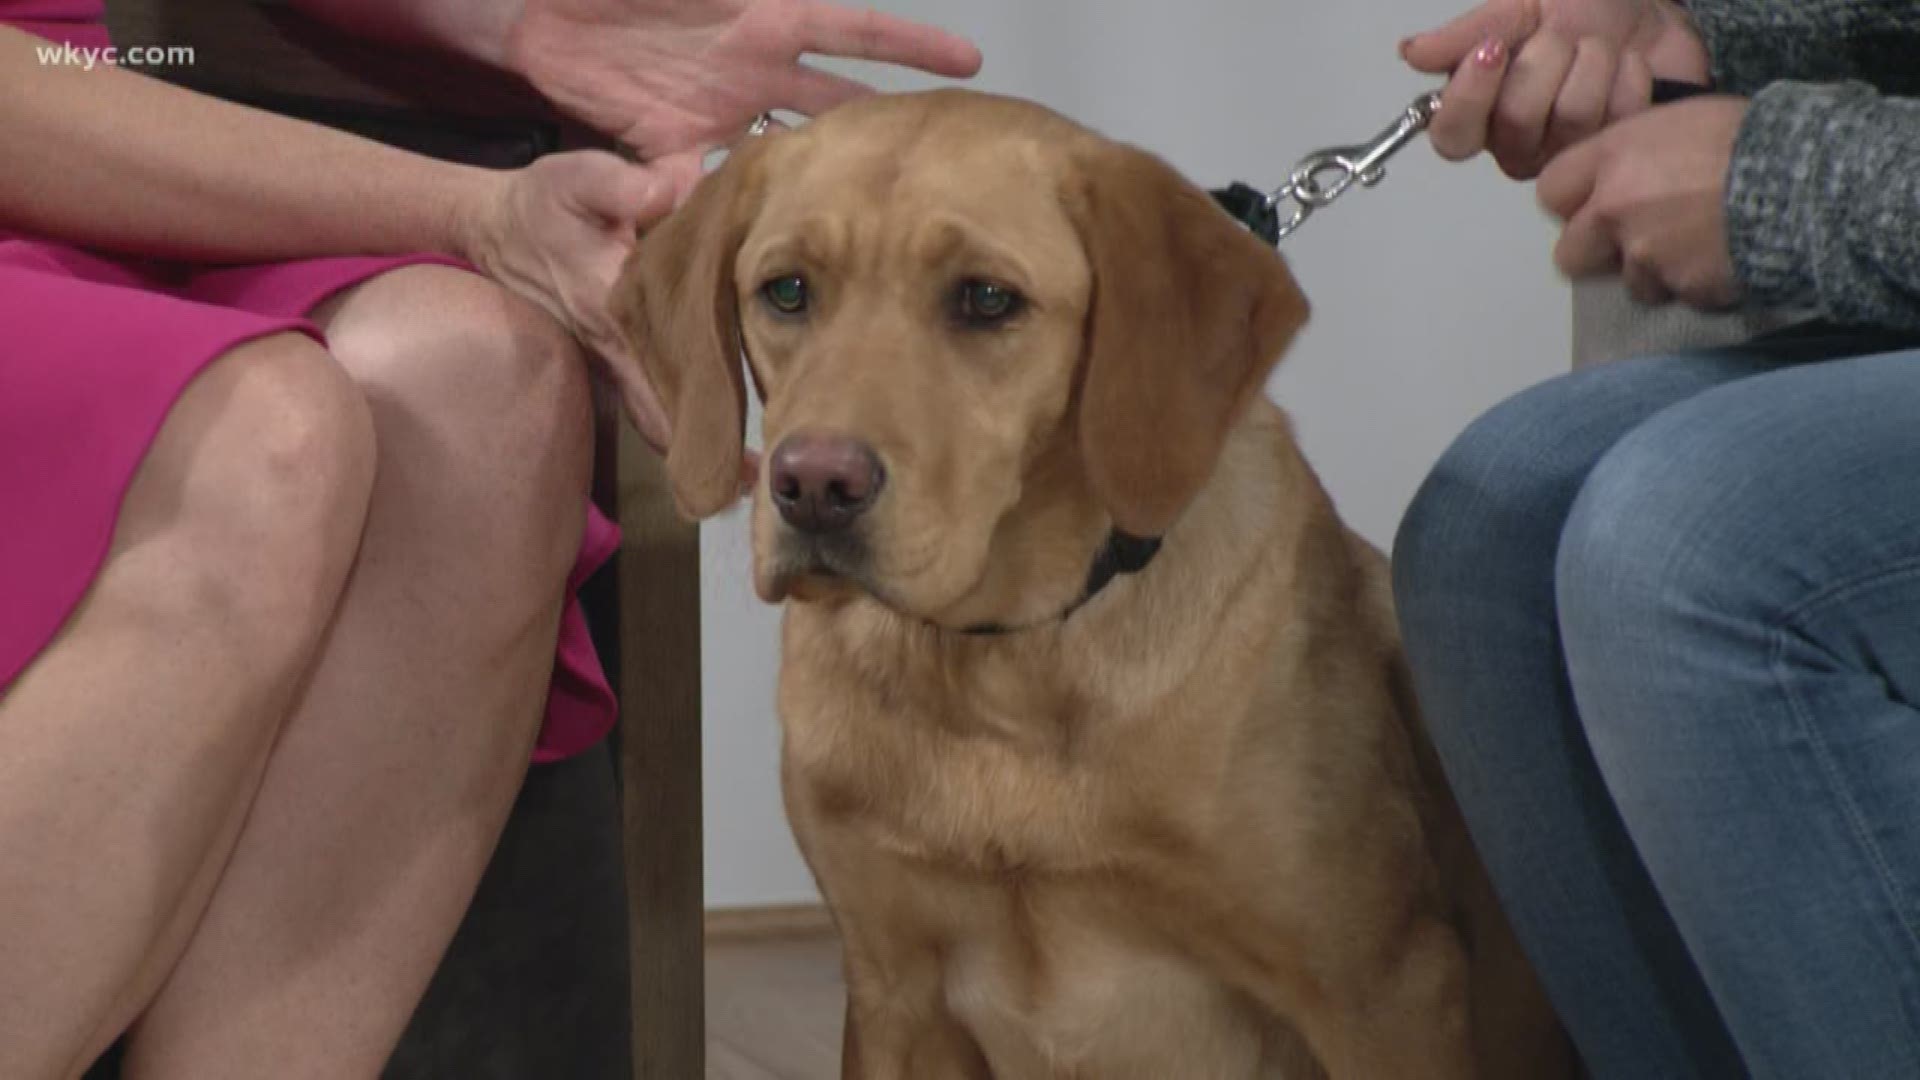 Nov. 19, 2019: Roxy is back in studio this morning as her handler offers must-know tips on how to keep your pup safe this winter season.